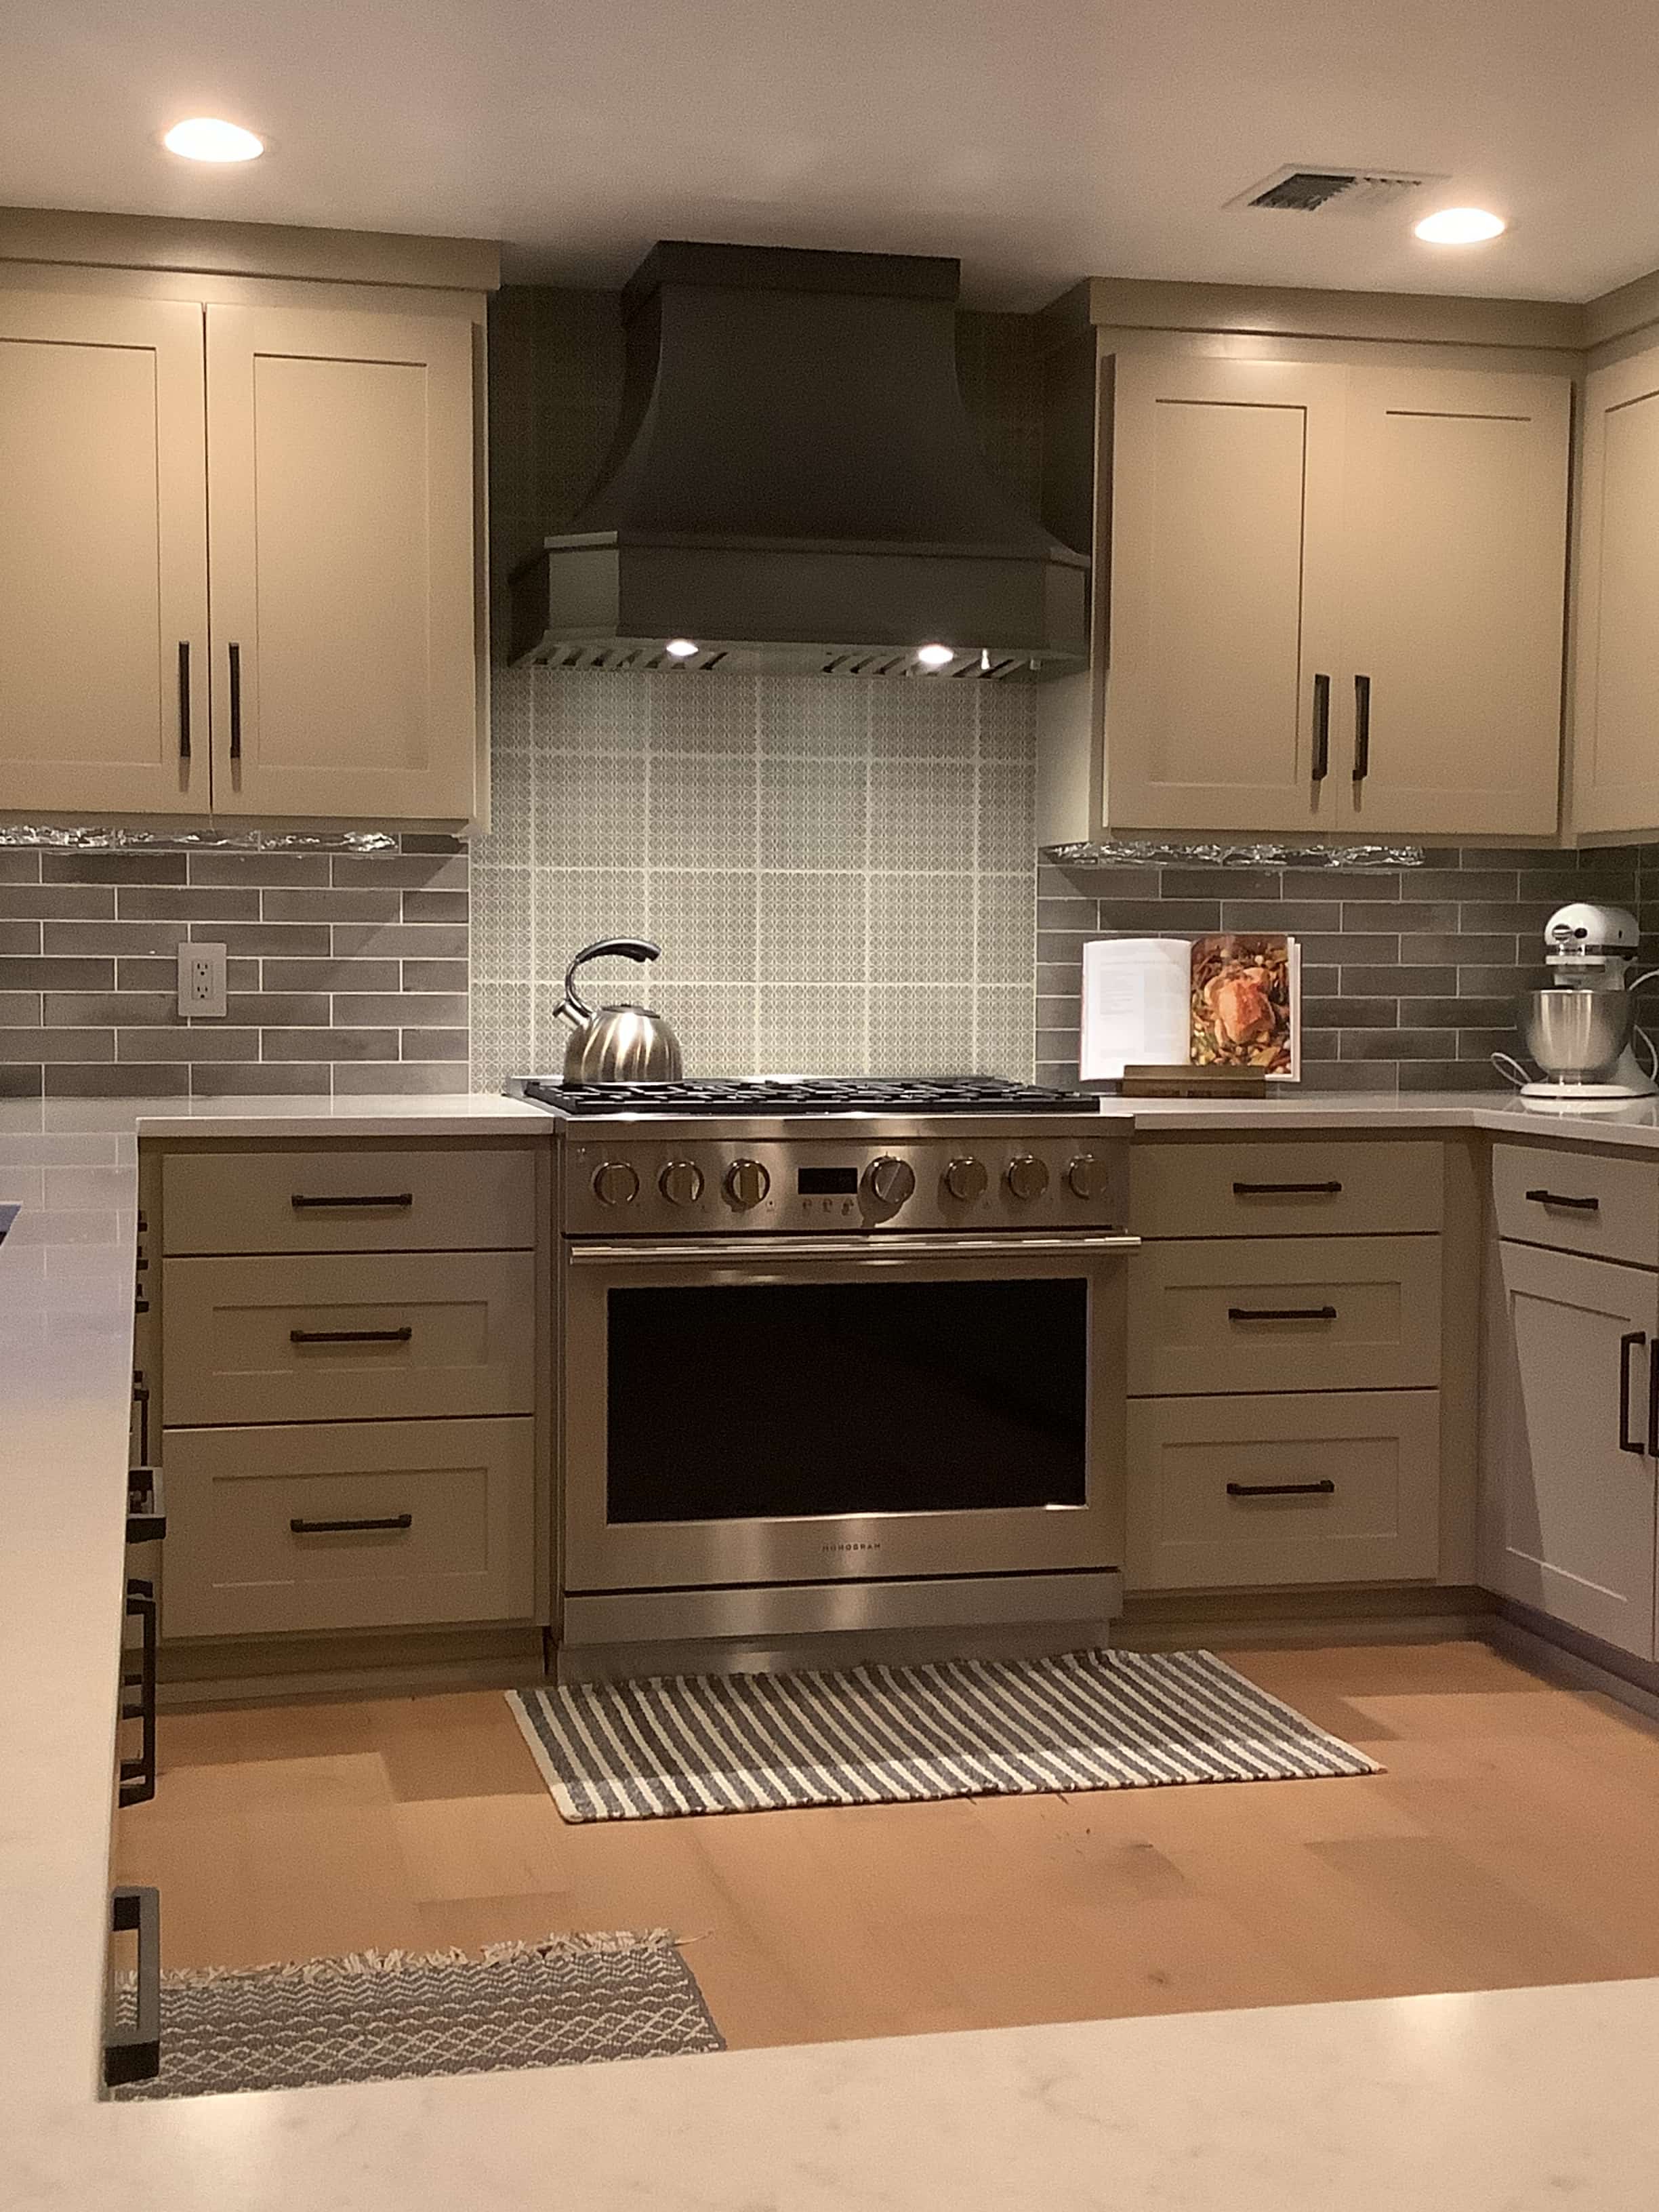 French inspiration meets modern elegance, enhance the ambiance with sleek grey kitchen cabinets complete the look with a charming brick backsplash